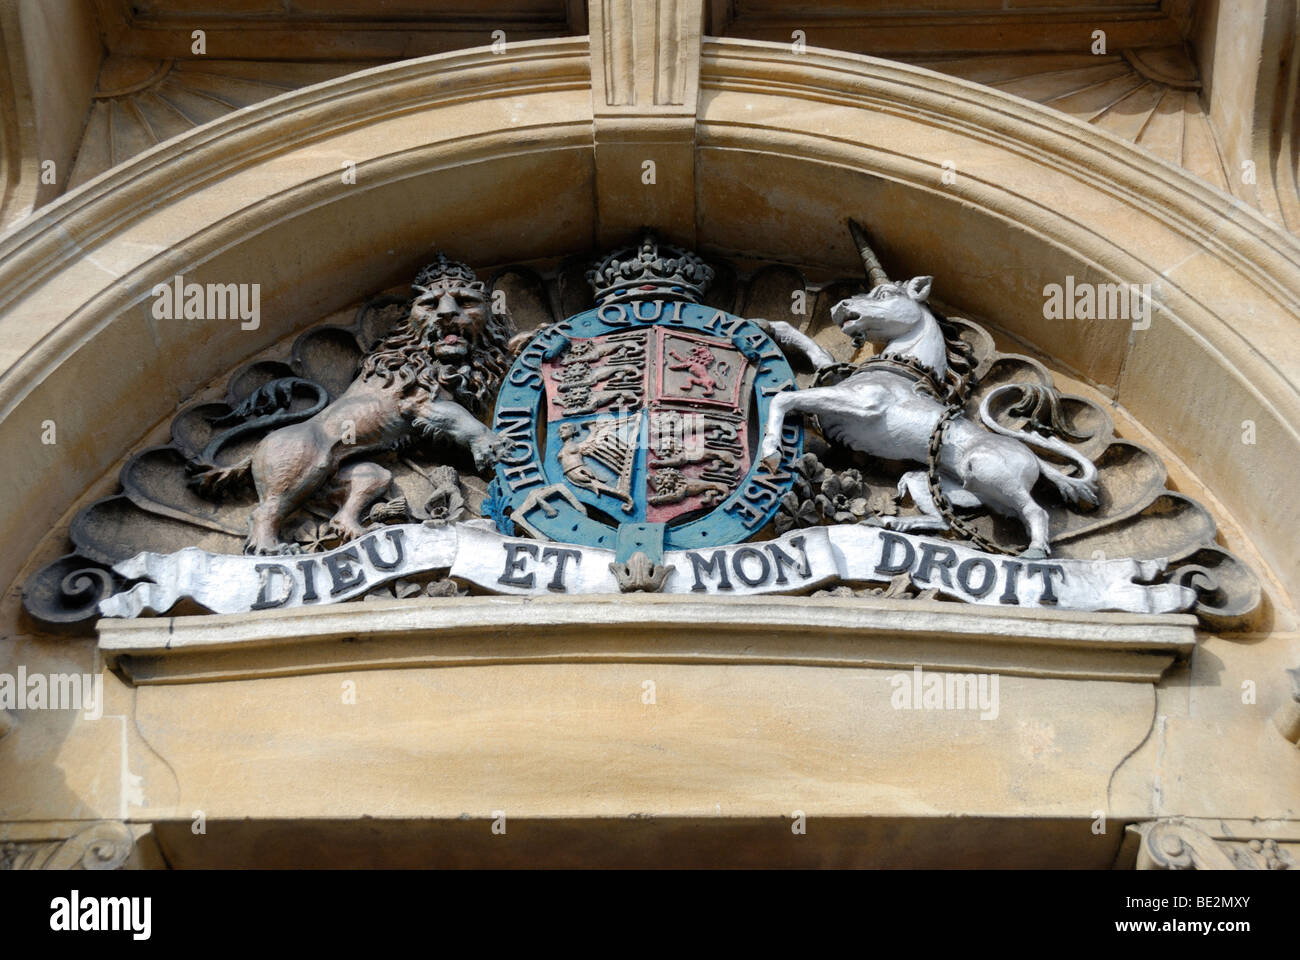 'Dieu et Mon Droit' motto and crest of the British Monarch on exterior of building in High Wycombe, Buckinghamshire, England Stock Photo